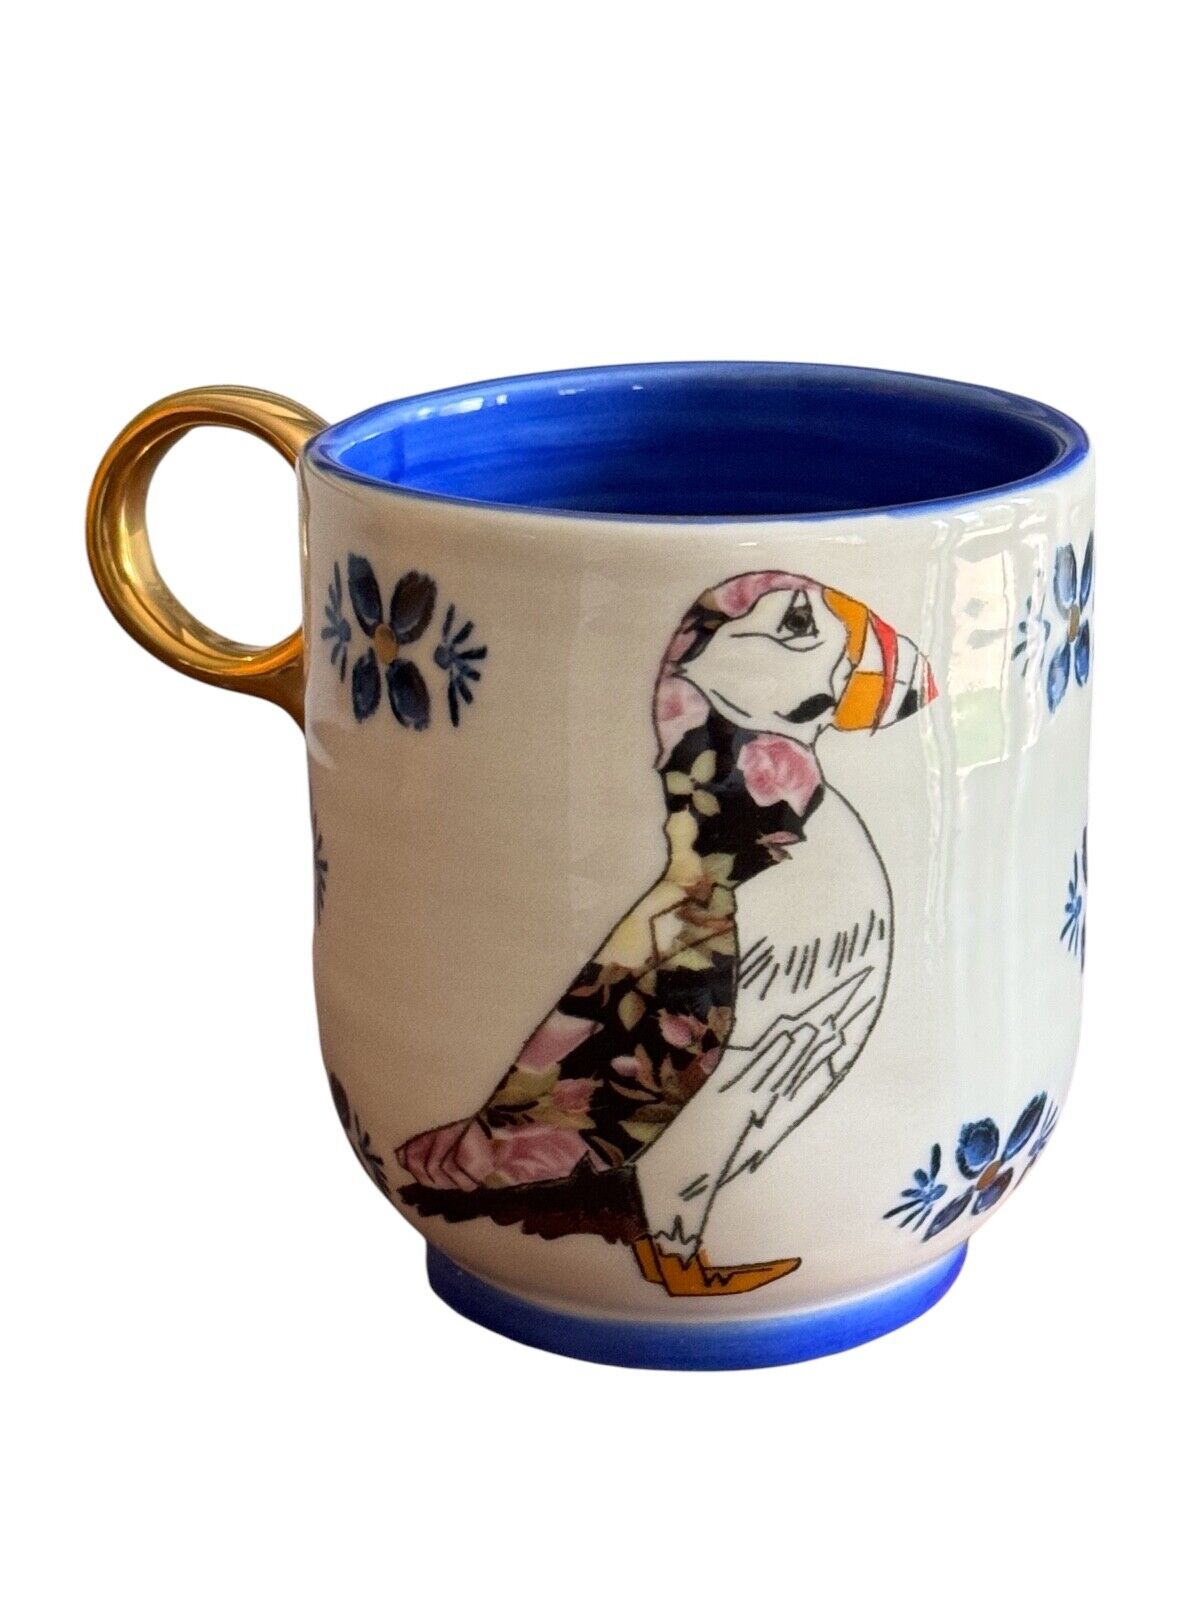 Anthropologie Plumology Puffin Coffee Mug by Lee Page Hanson 4”